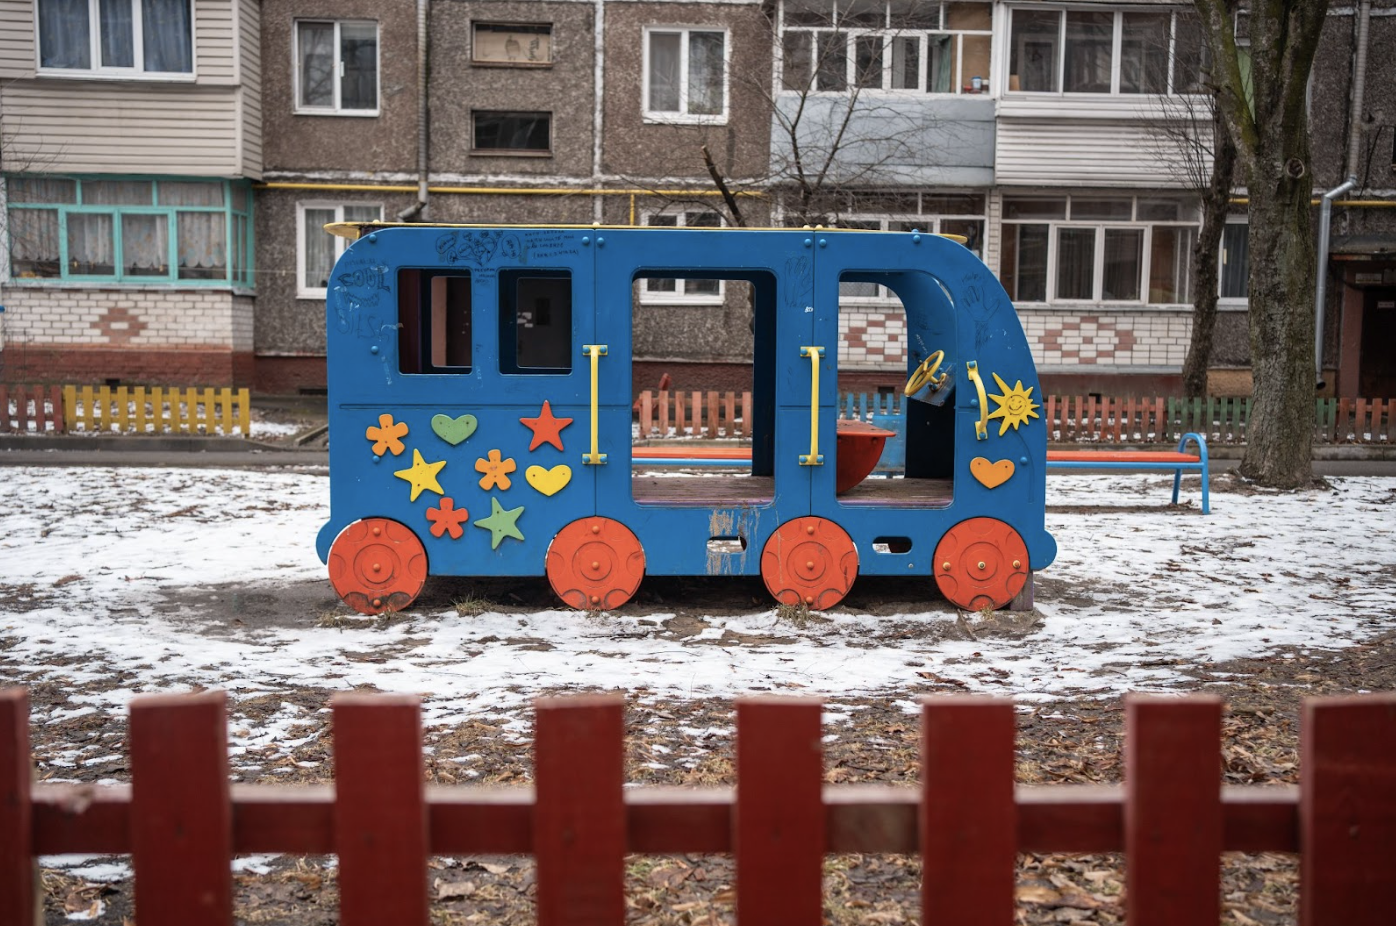 A colorful play bus sits outside, surrounded by snow.